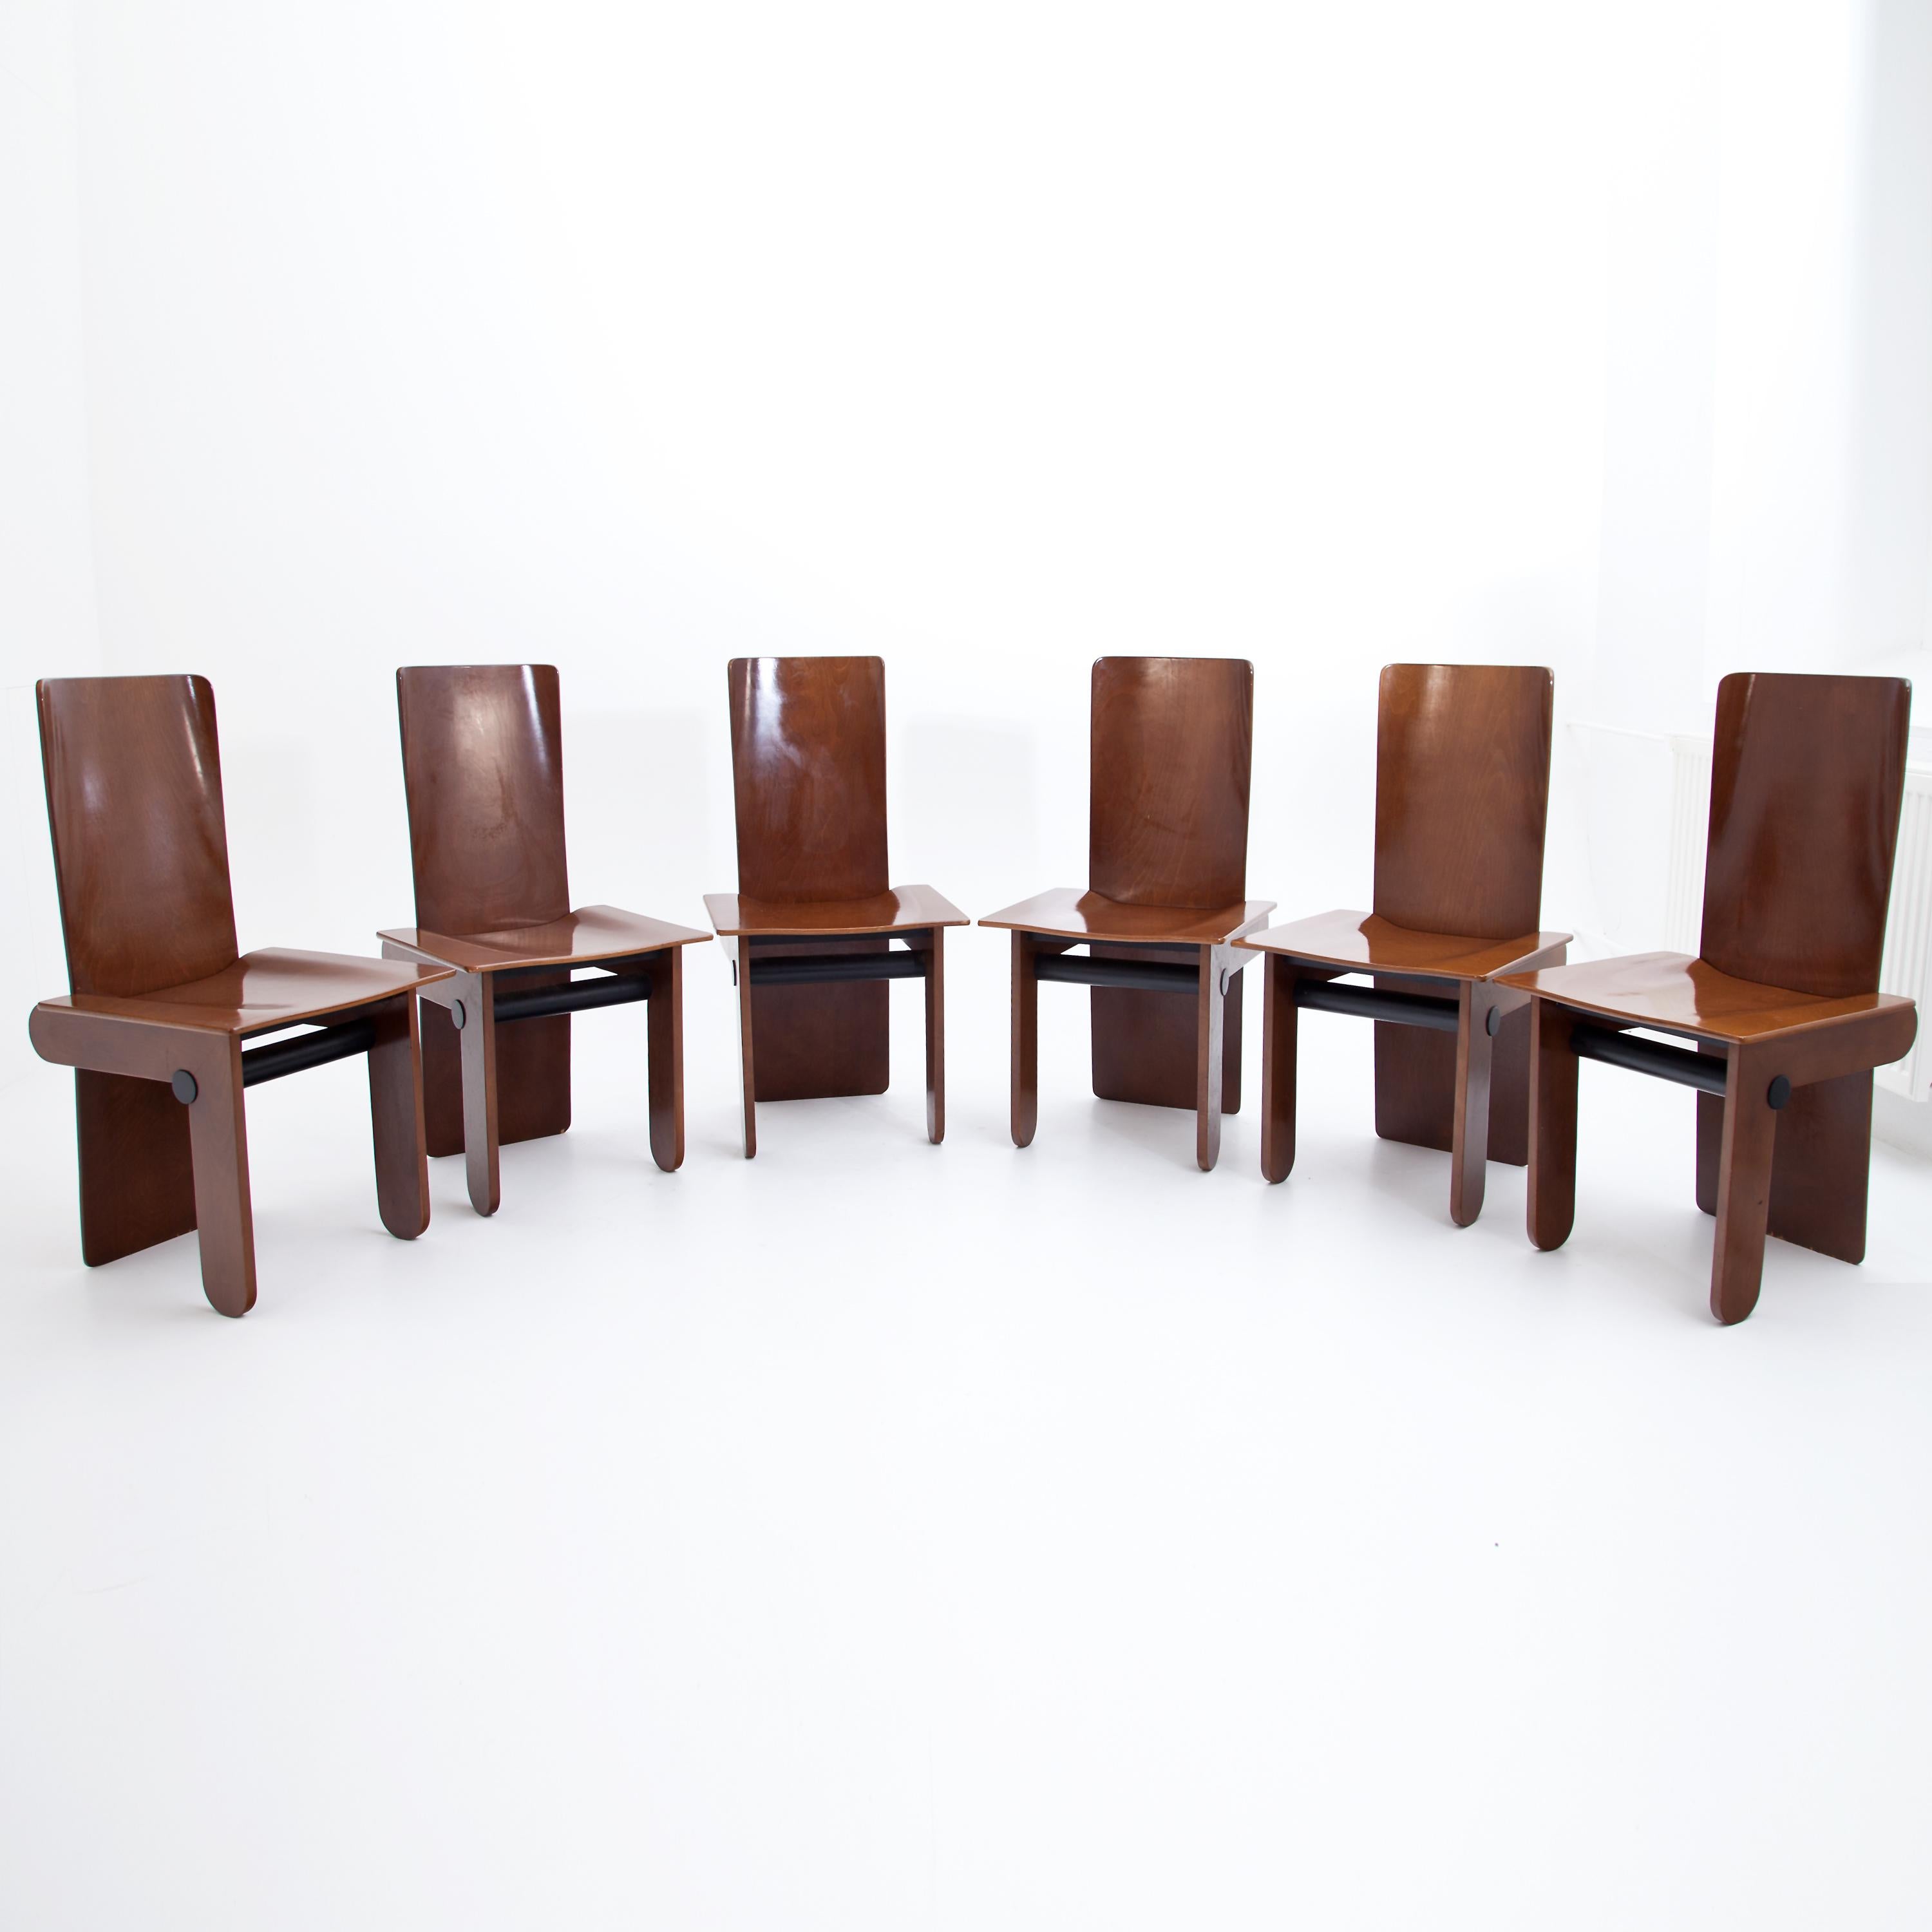 Set of six chairs made of dark stained and ebonized wood in a geometrically constructed design. The chairs were designed by Tobia Scarpa for Gavina in the 1970s. Very good refurbished condition.